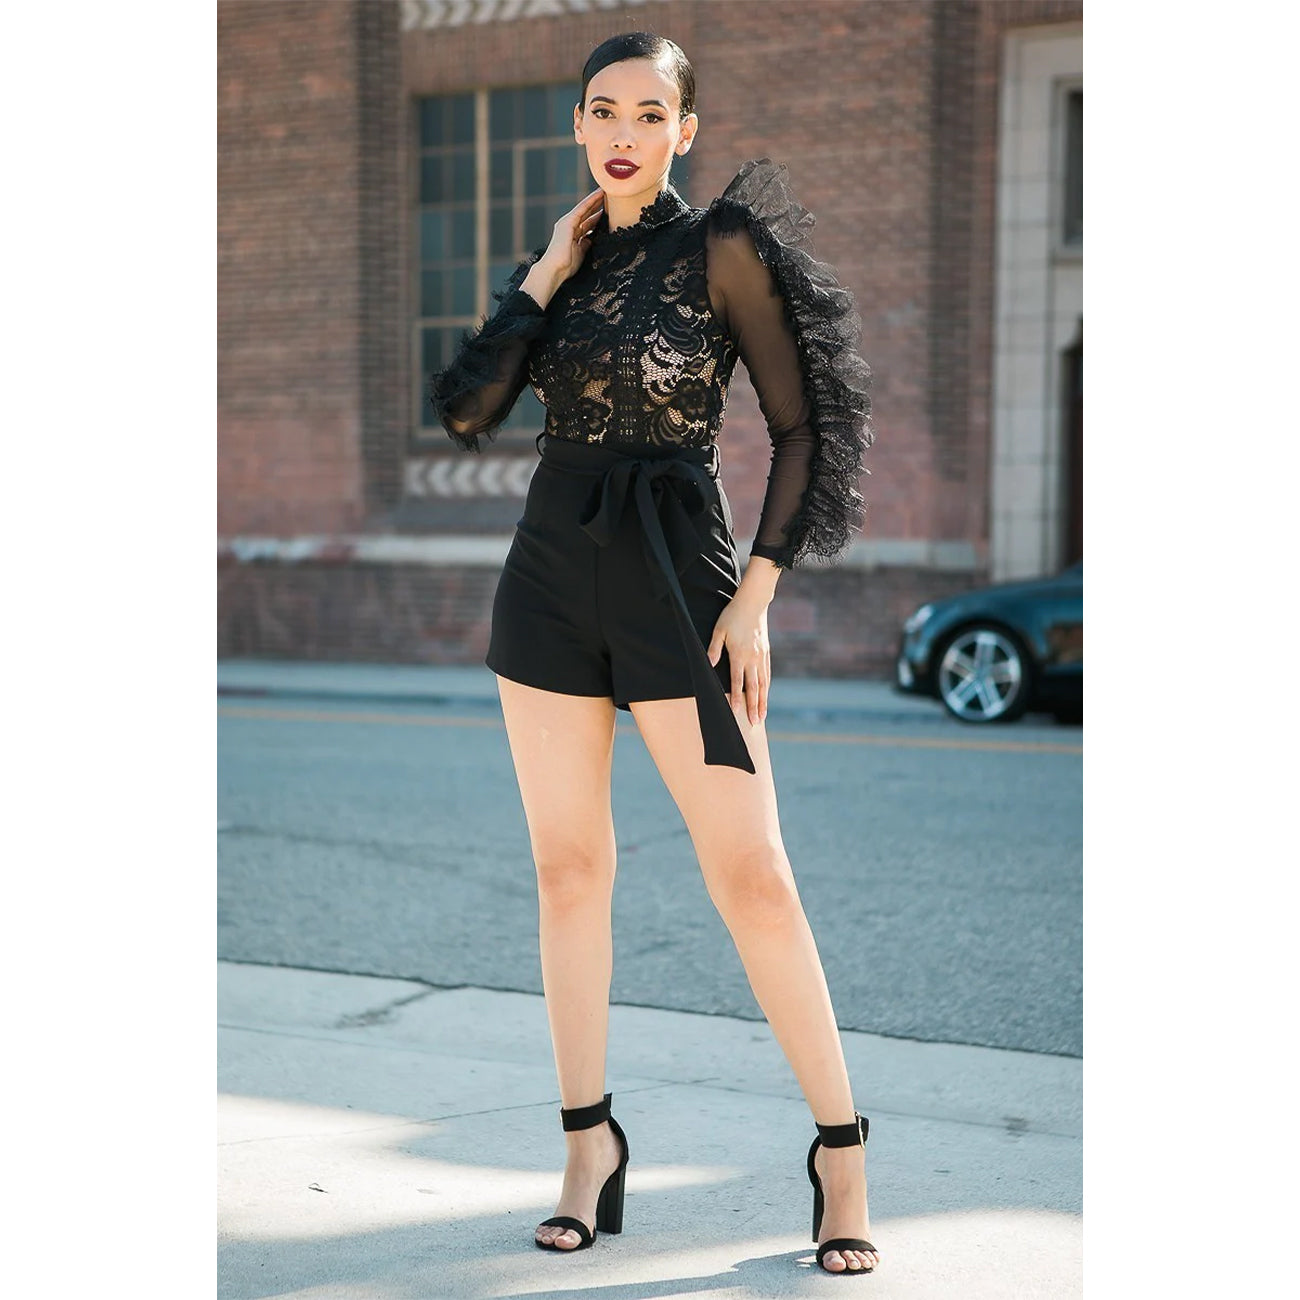 Lace And Crochet Women's Top Fashion Romper